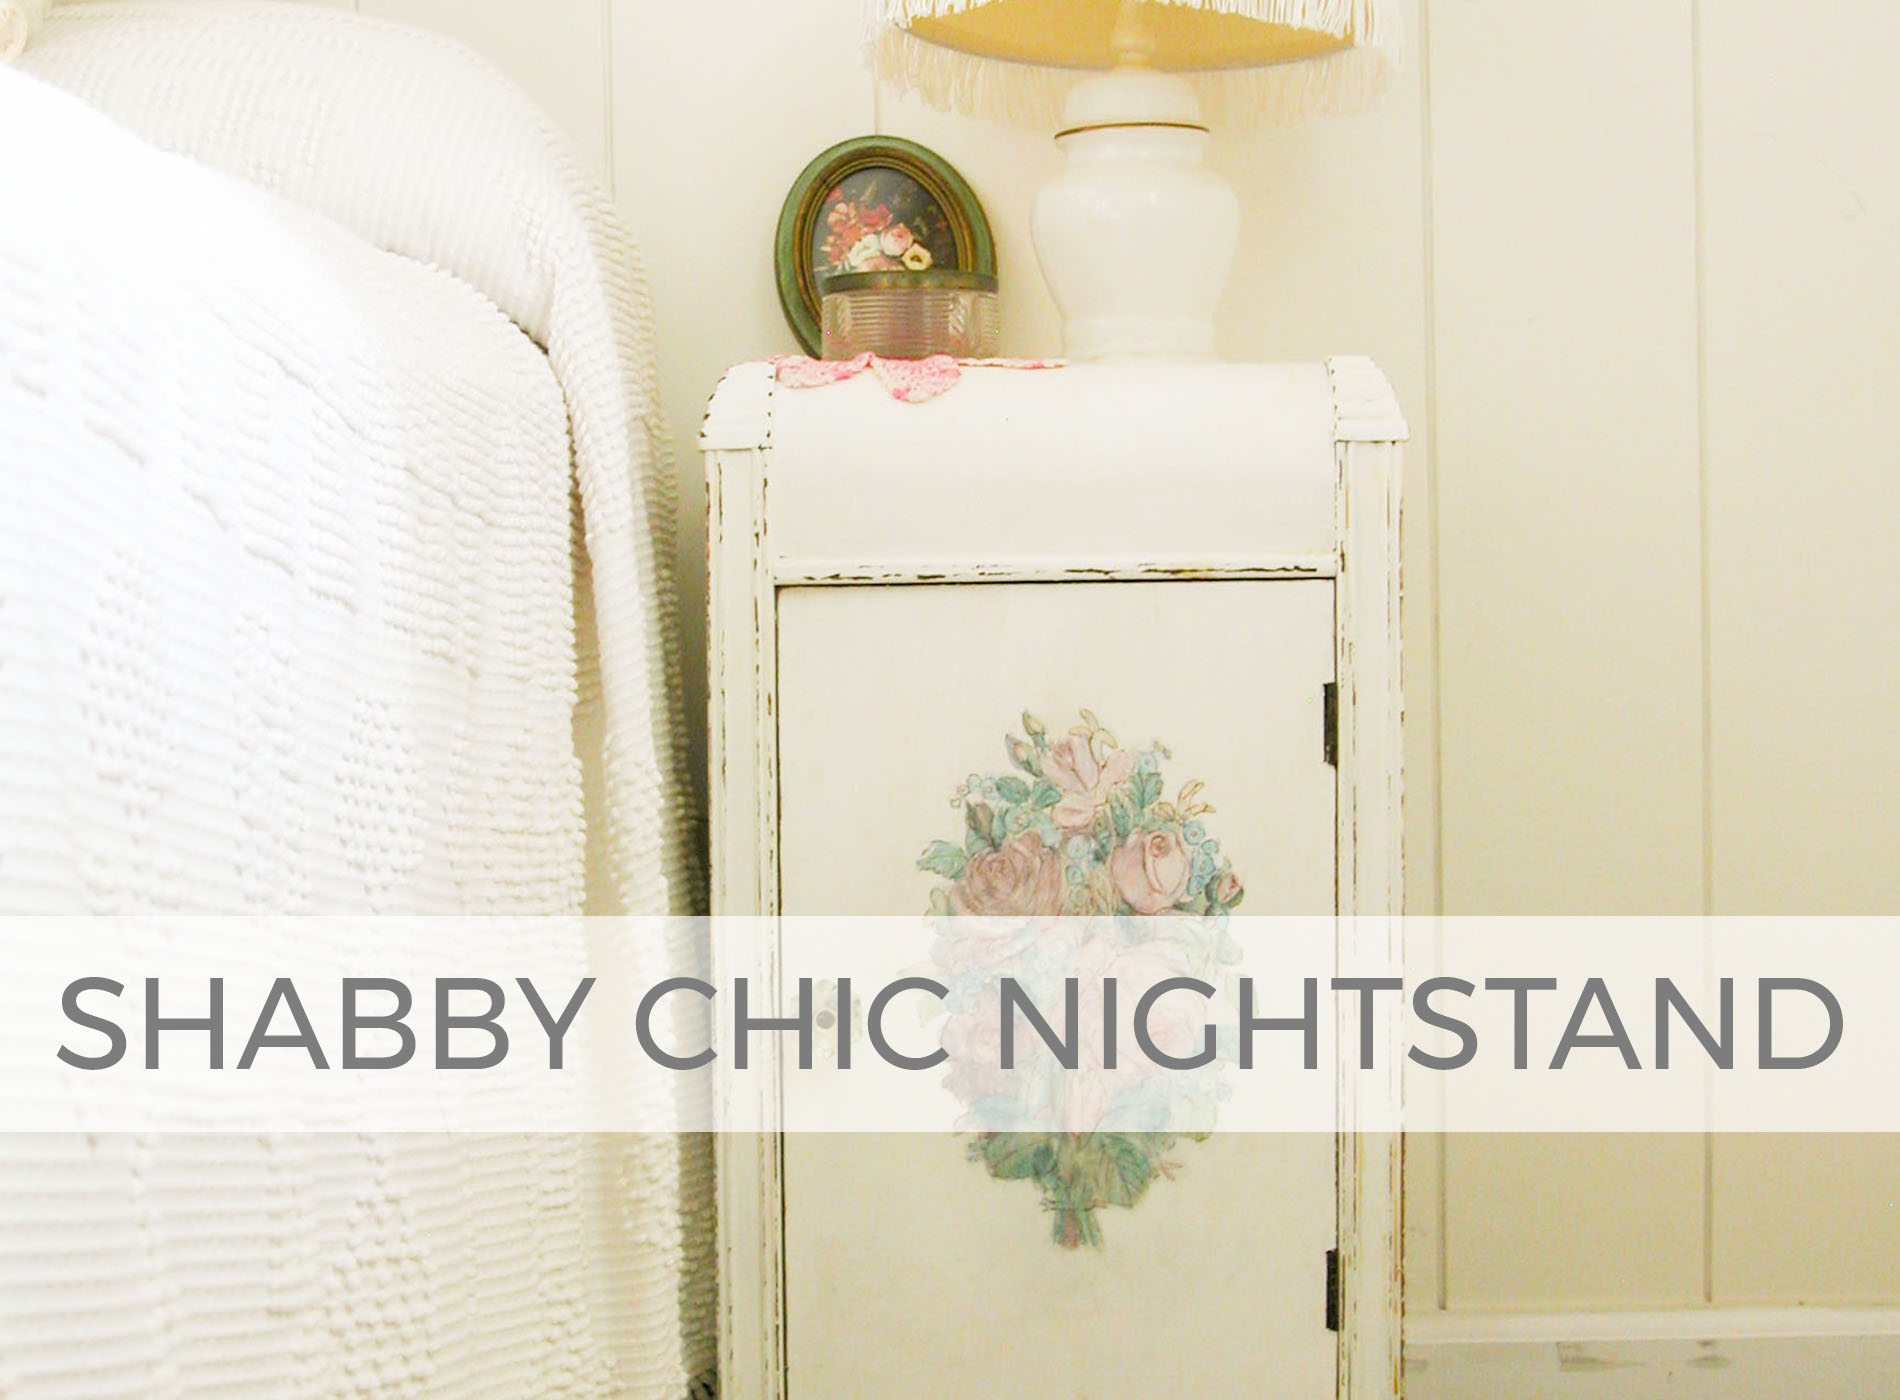 Shabby Chic Nightstand by Prodigal Pieces | prodigalpieces.com